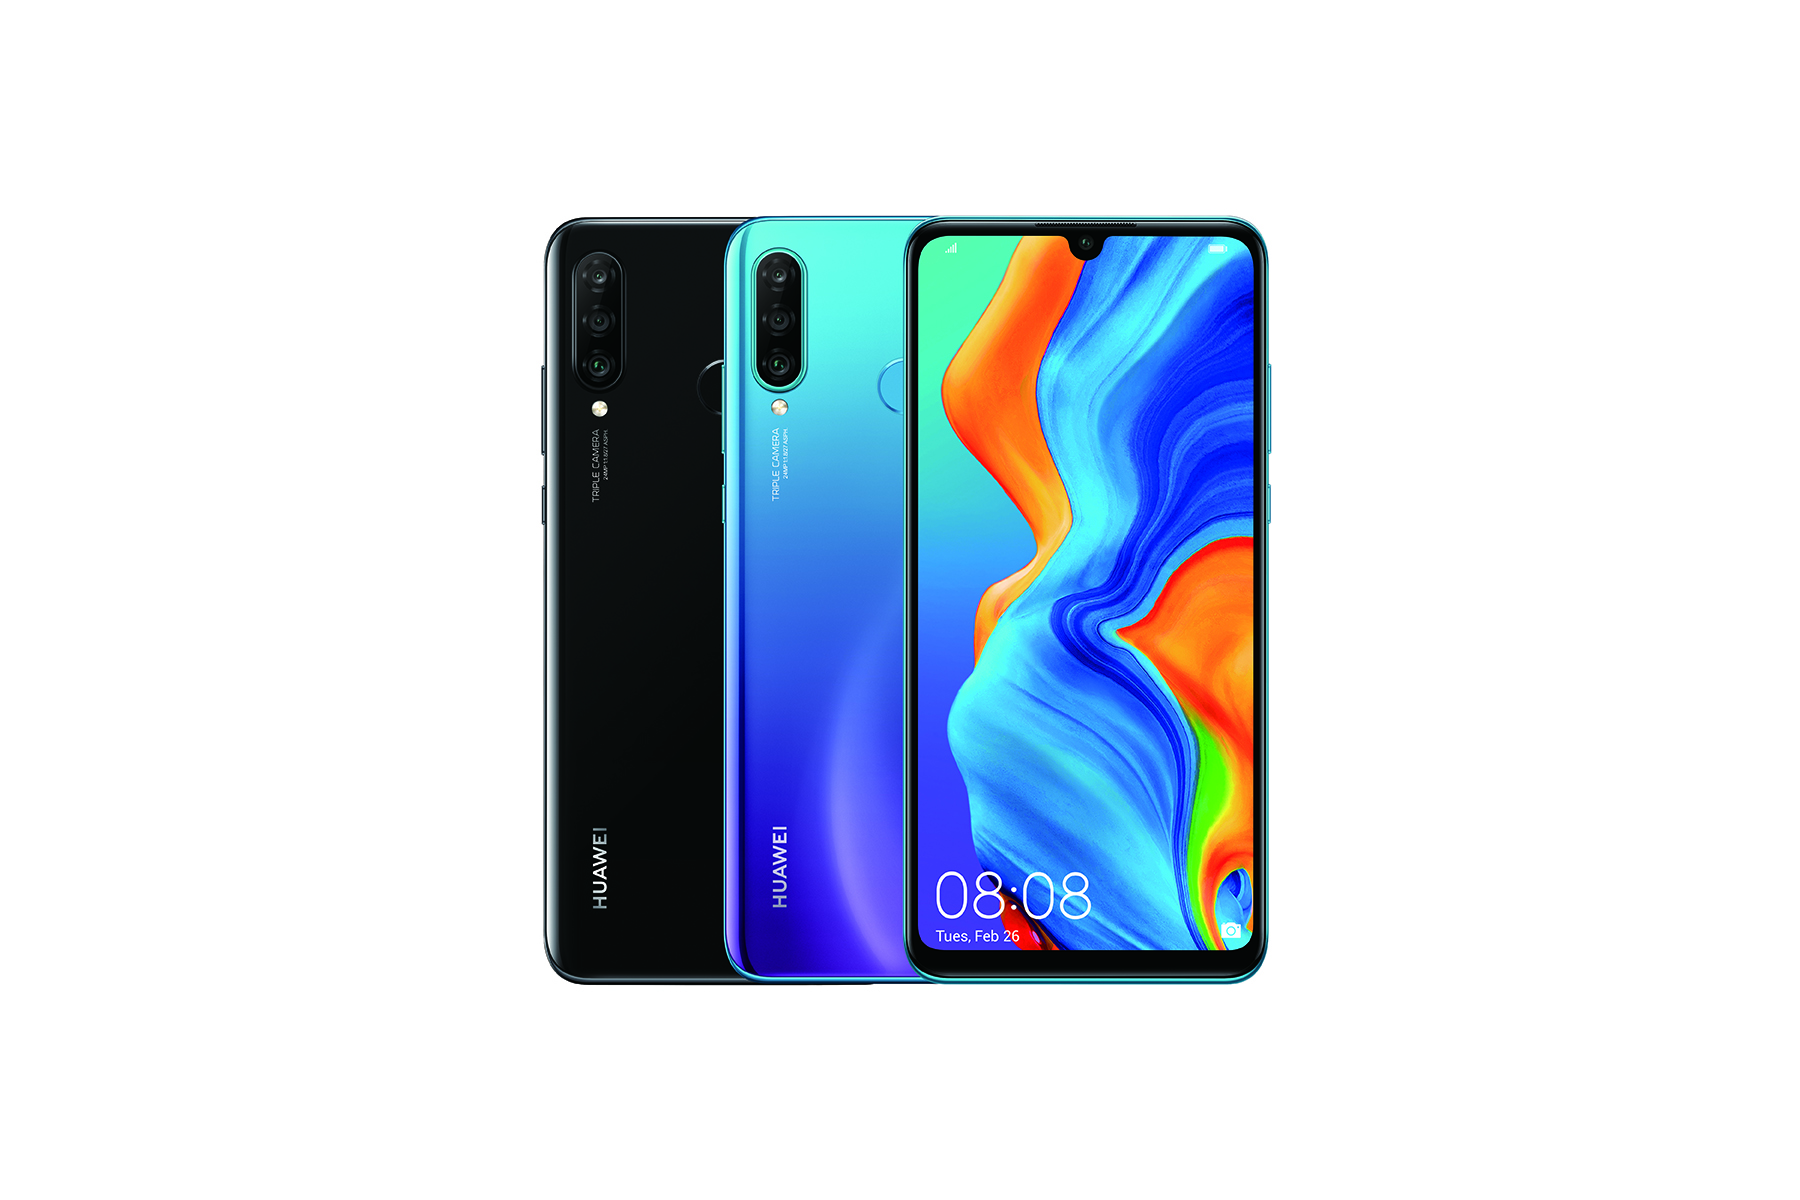 Huawei Rewrites the Rules of Photography with Groundbreaking HUAWEI P30 Series